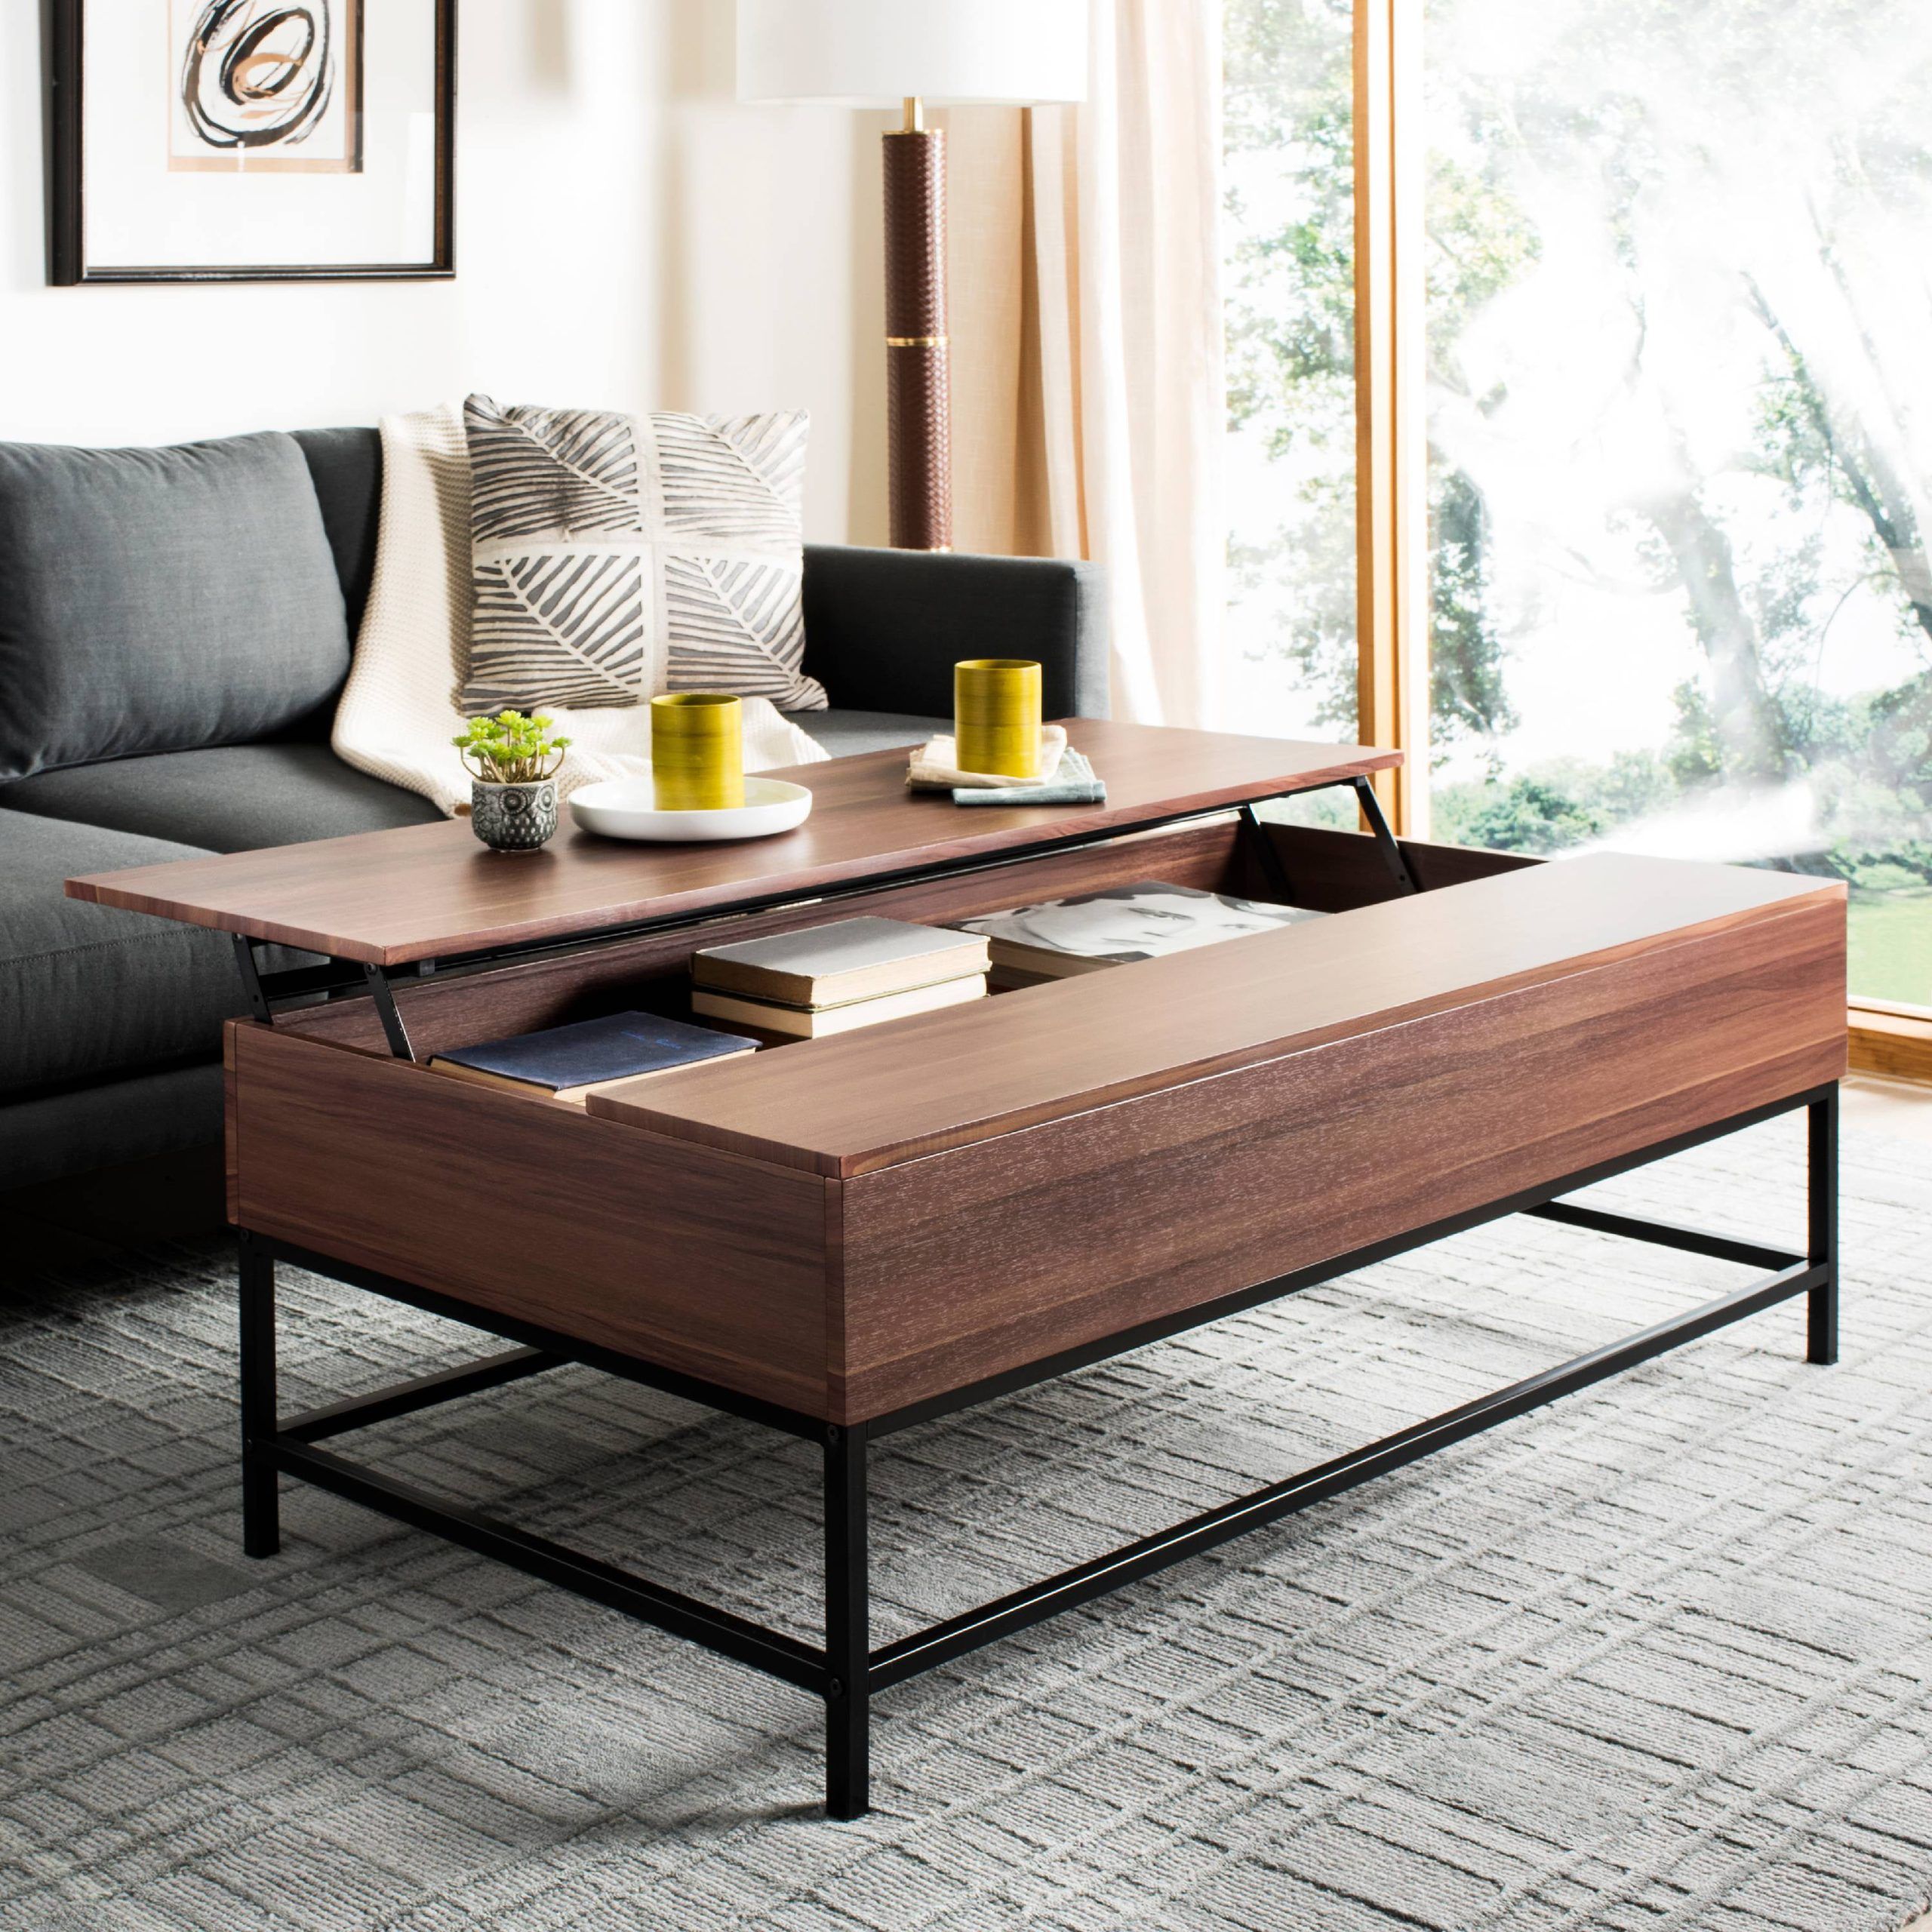 Safavieh Gina Contemporary Lift Top Coffee Table With Storage – Walmart Pertaining To Lift Top Coffee Tables (View 8 of 15)